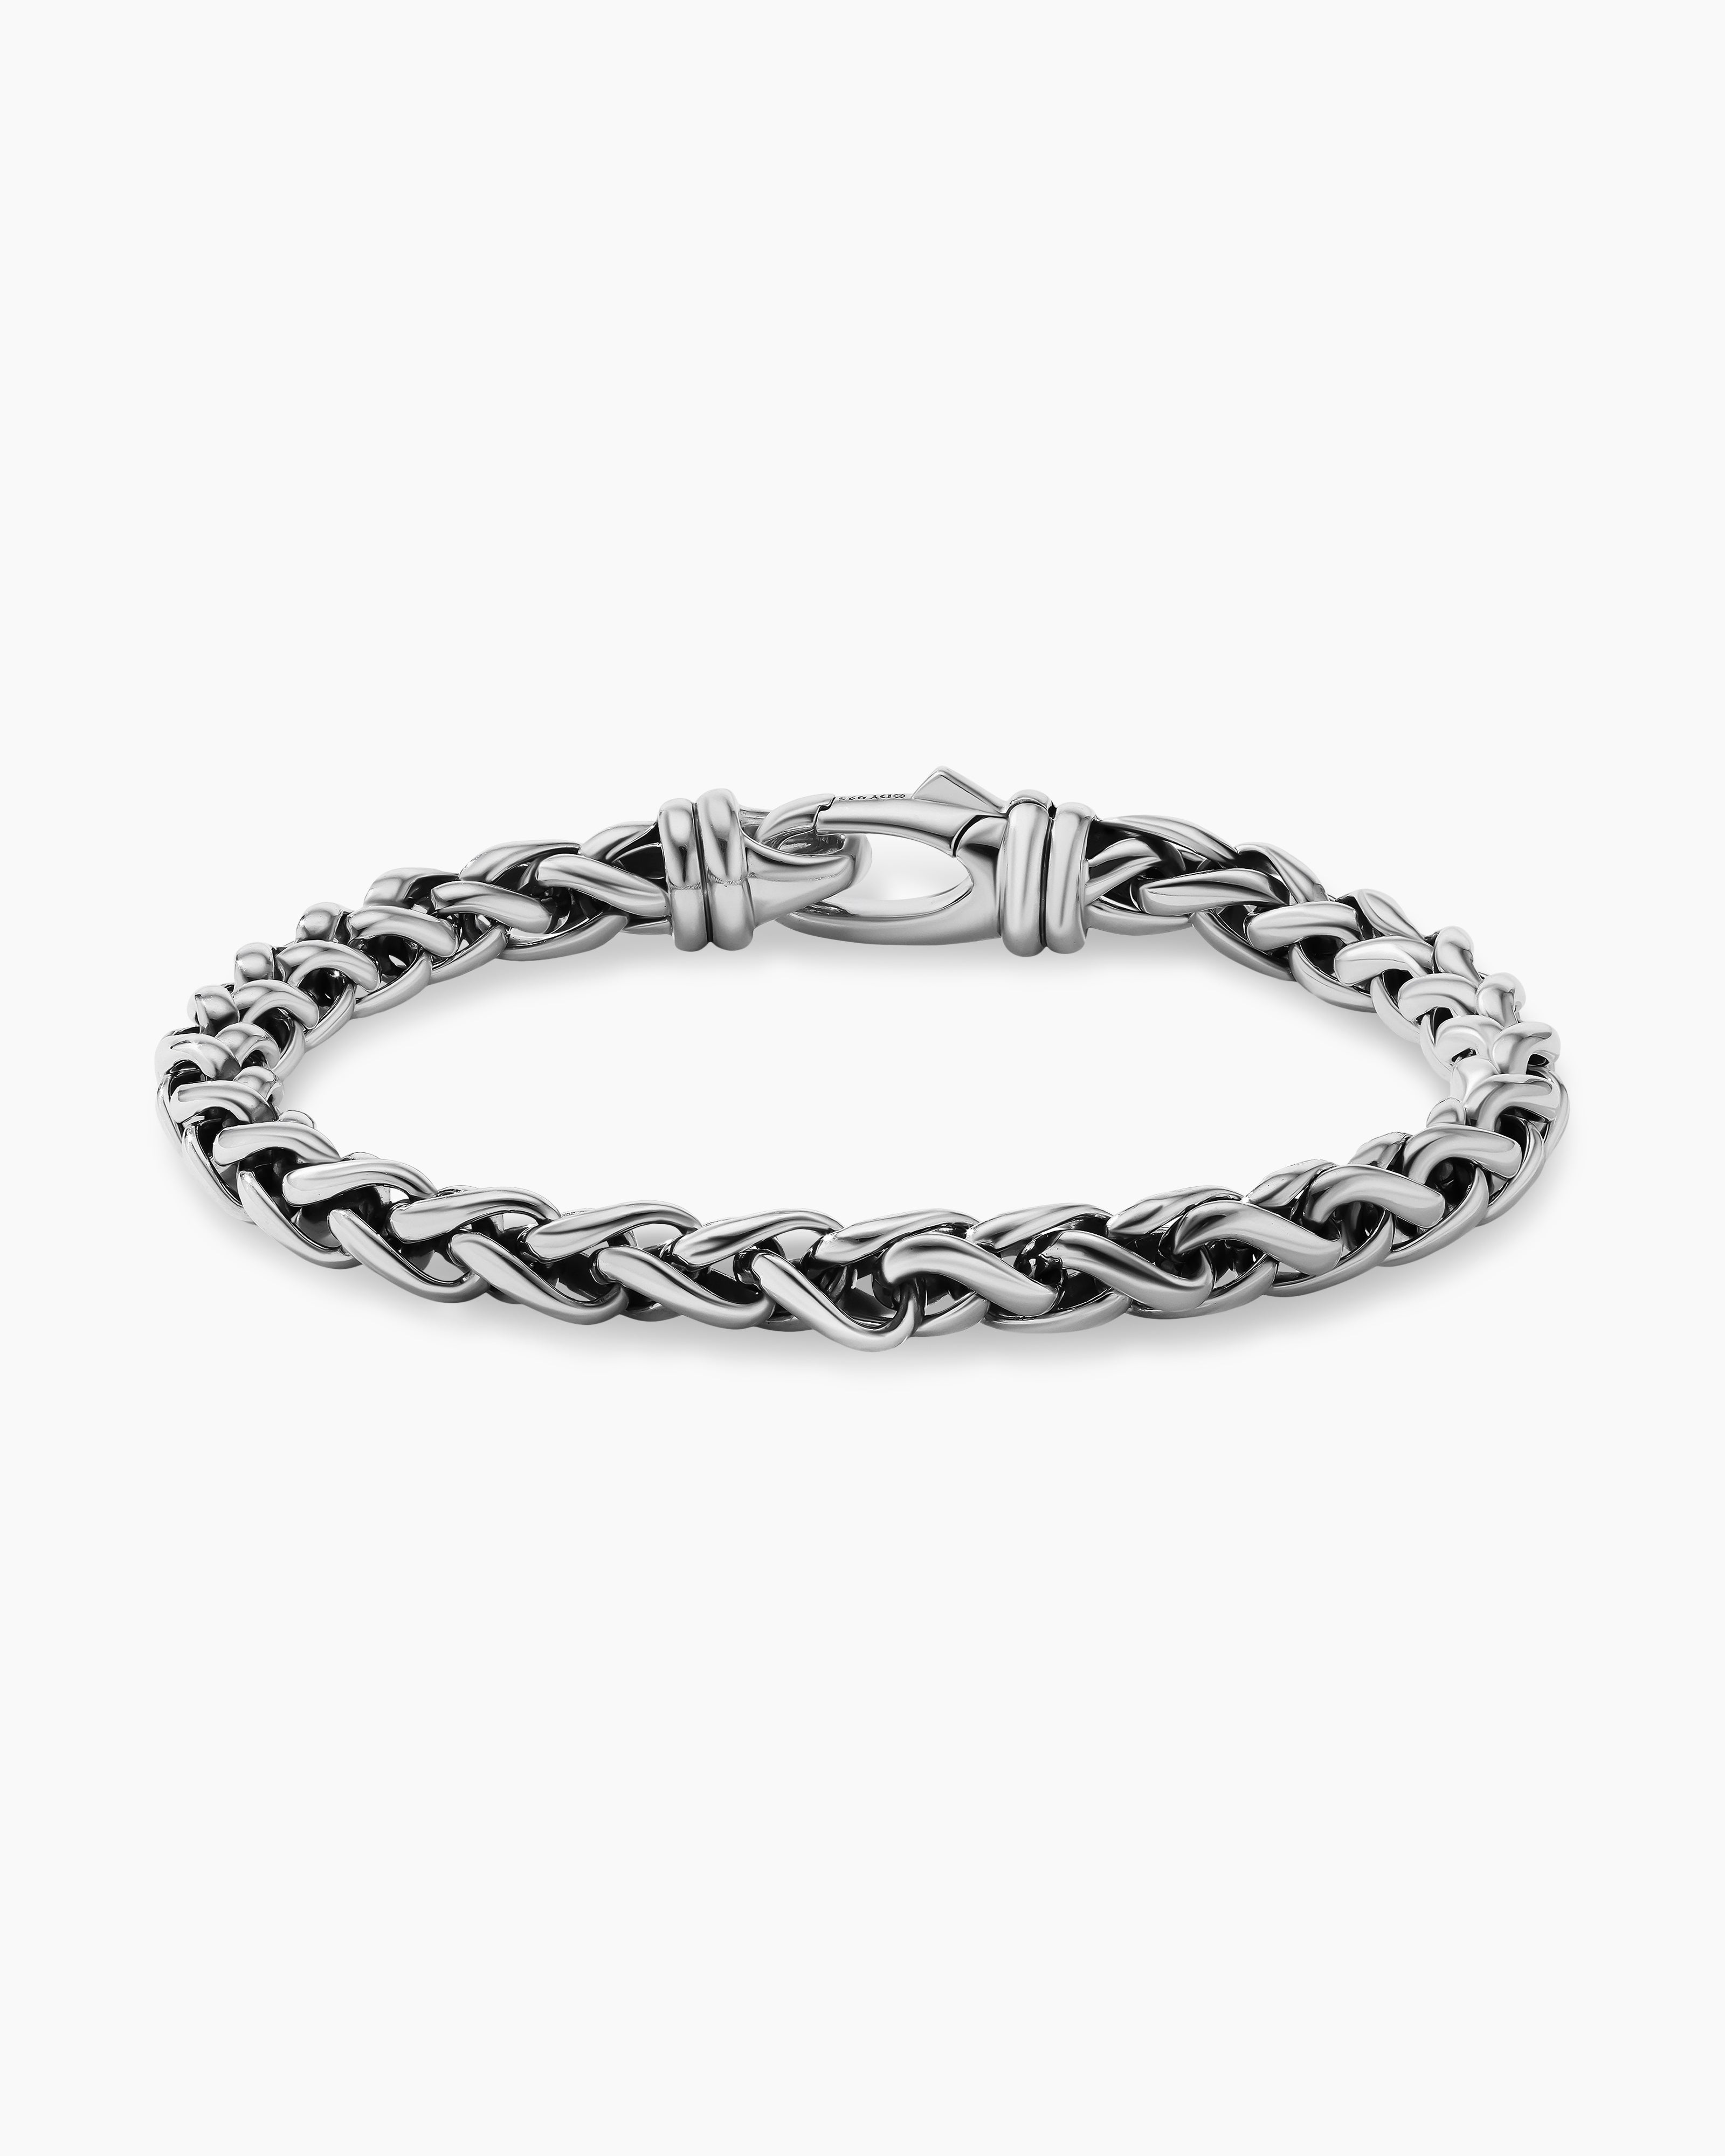 Link Chain Bracelet For Men 925 Sterling Silver Thai Retro Domineering Punk  Tide Pattern Whip From Quan10, $62.09 | DHgate.Com